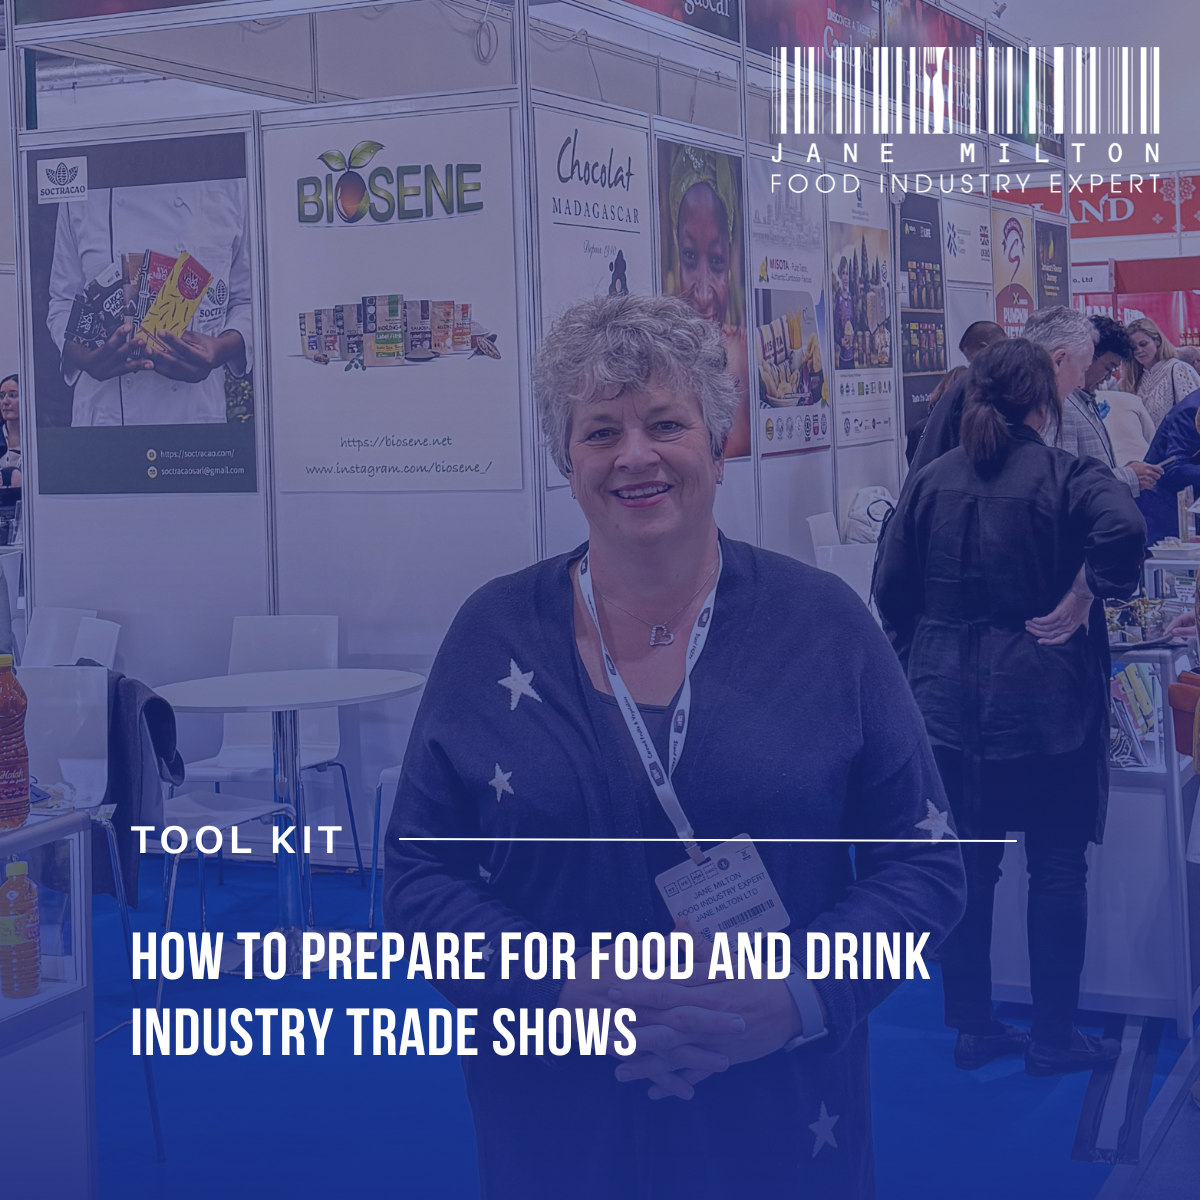 How to Prepare for Food and Drink Industry Trade Shows IG post